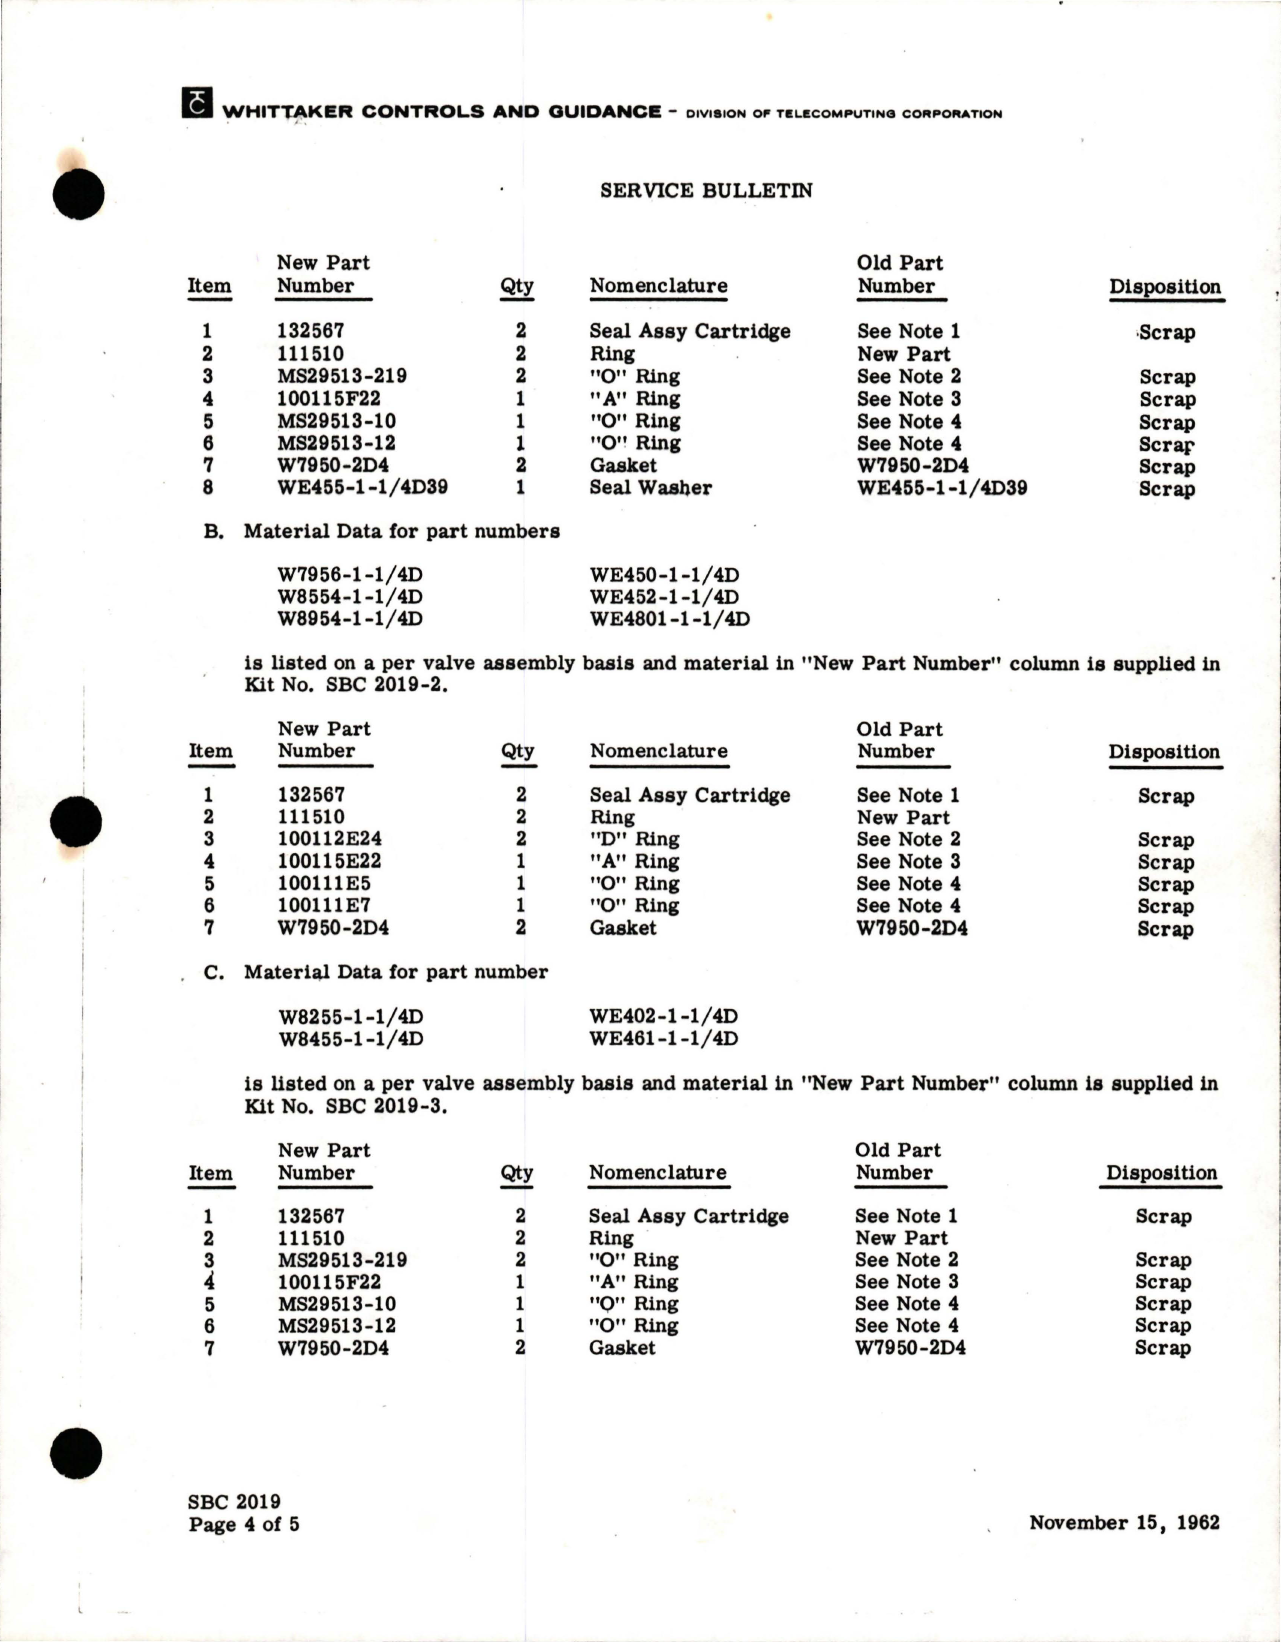 Sample page 5 from AirCorps Library document: Conversion to Teflon Seals - 1 1/4 inch Gate Valves